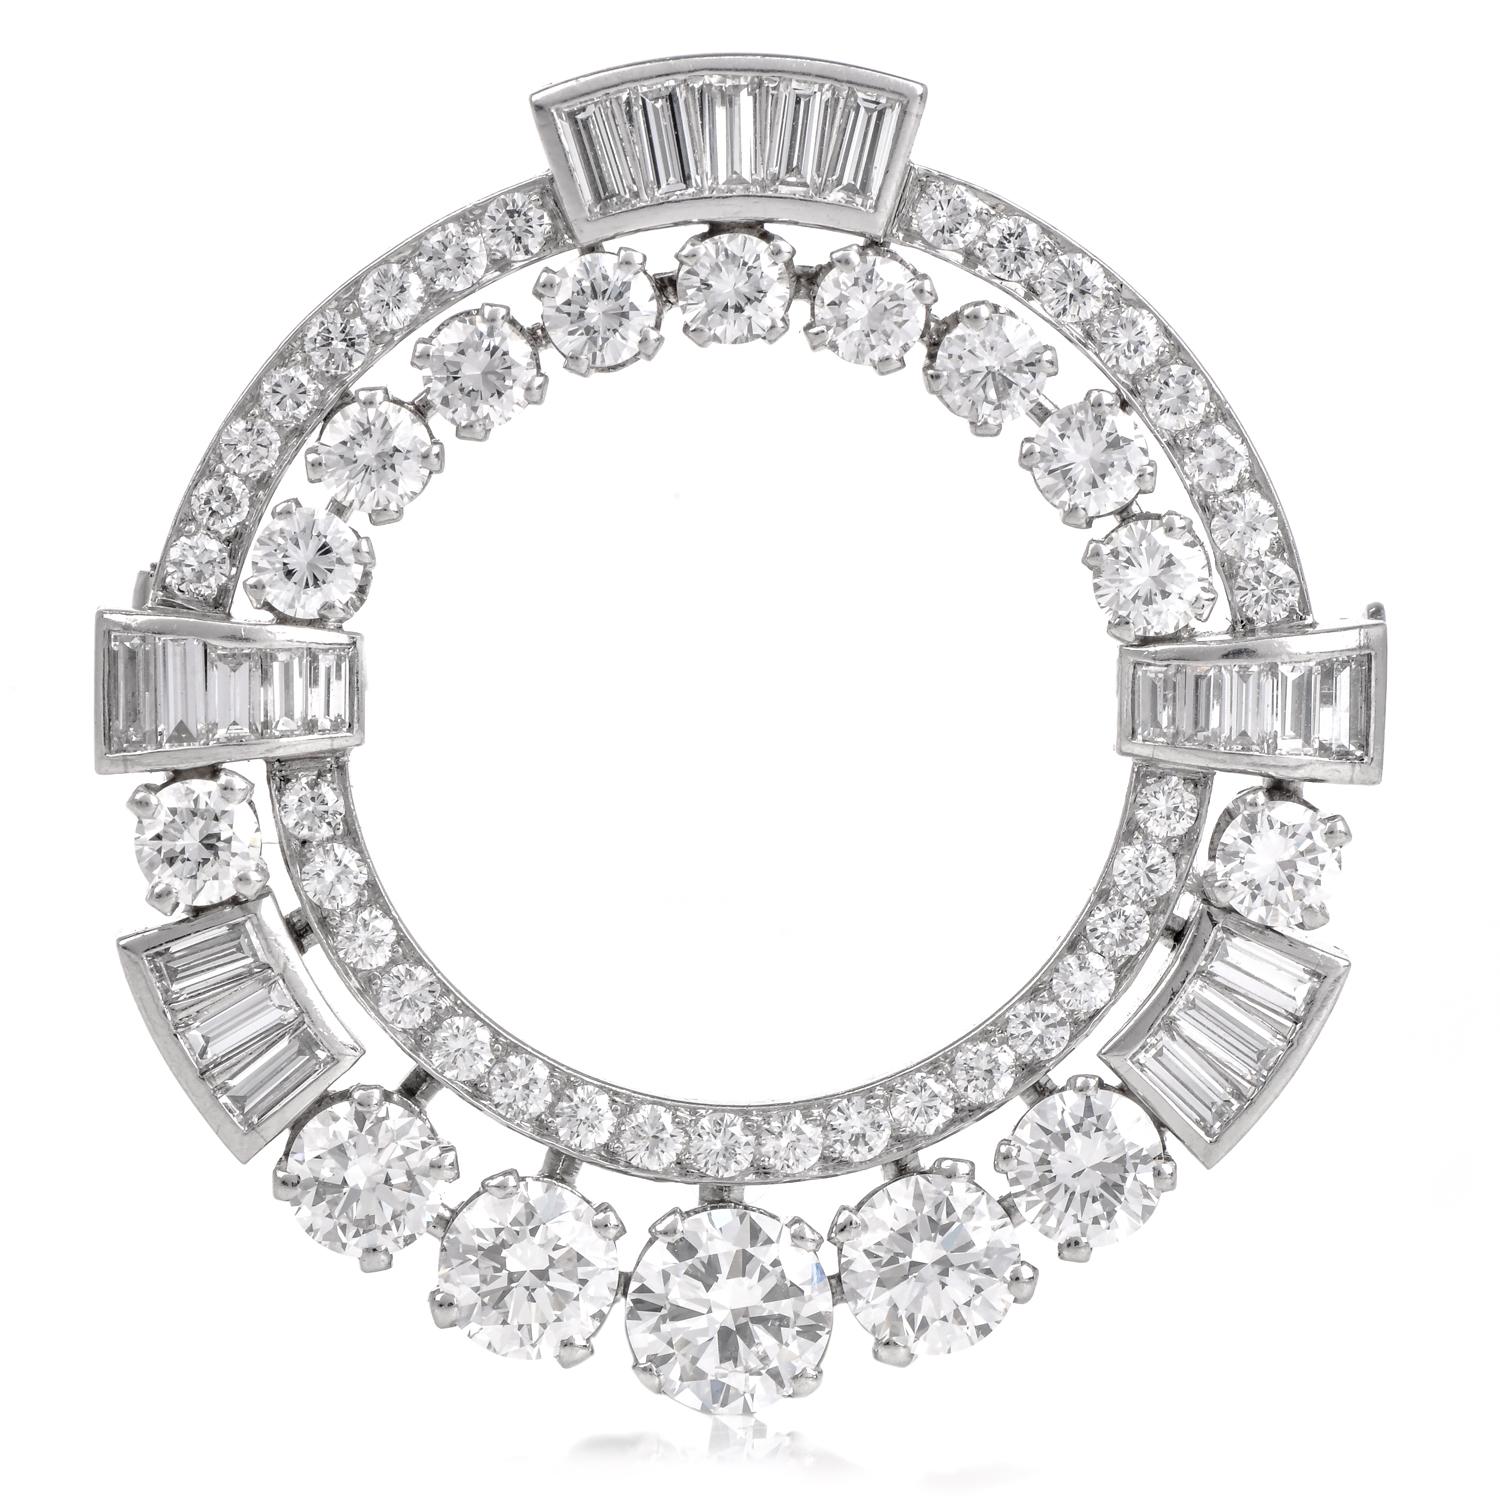 Estate Wreath Design pin decorated with natural earth-mined Round and Baguette cut Diamonds forged in Platinum. Secured with a side lock clasp pin.

Metal: Platinum

Measurements: 35mm x 33mm

Diamonds Weight Approx: 5.00 cttw

Color Grade Range: